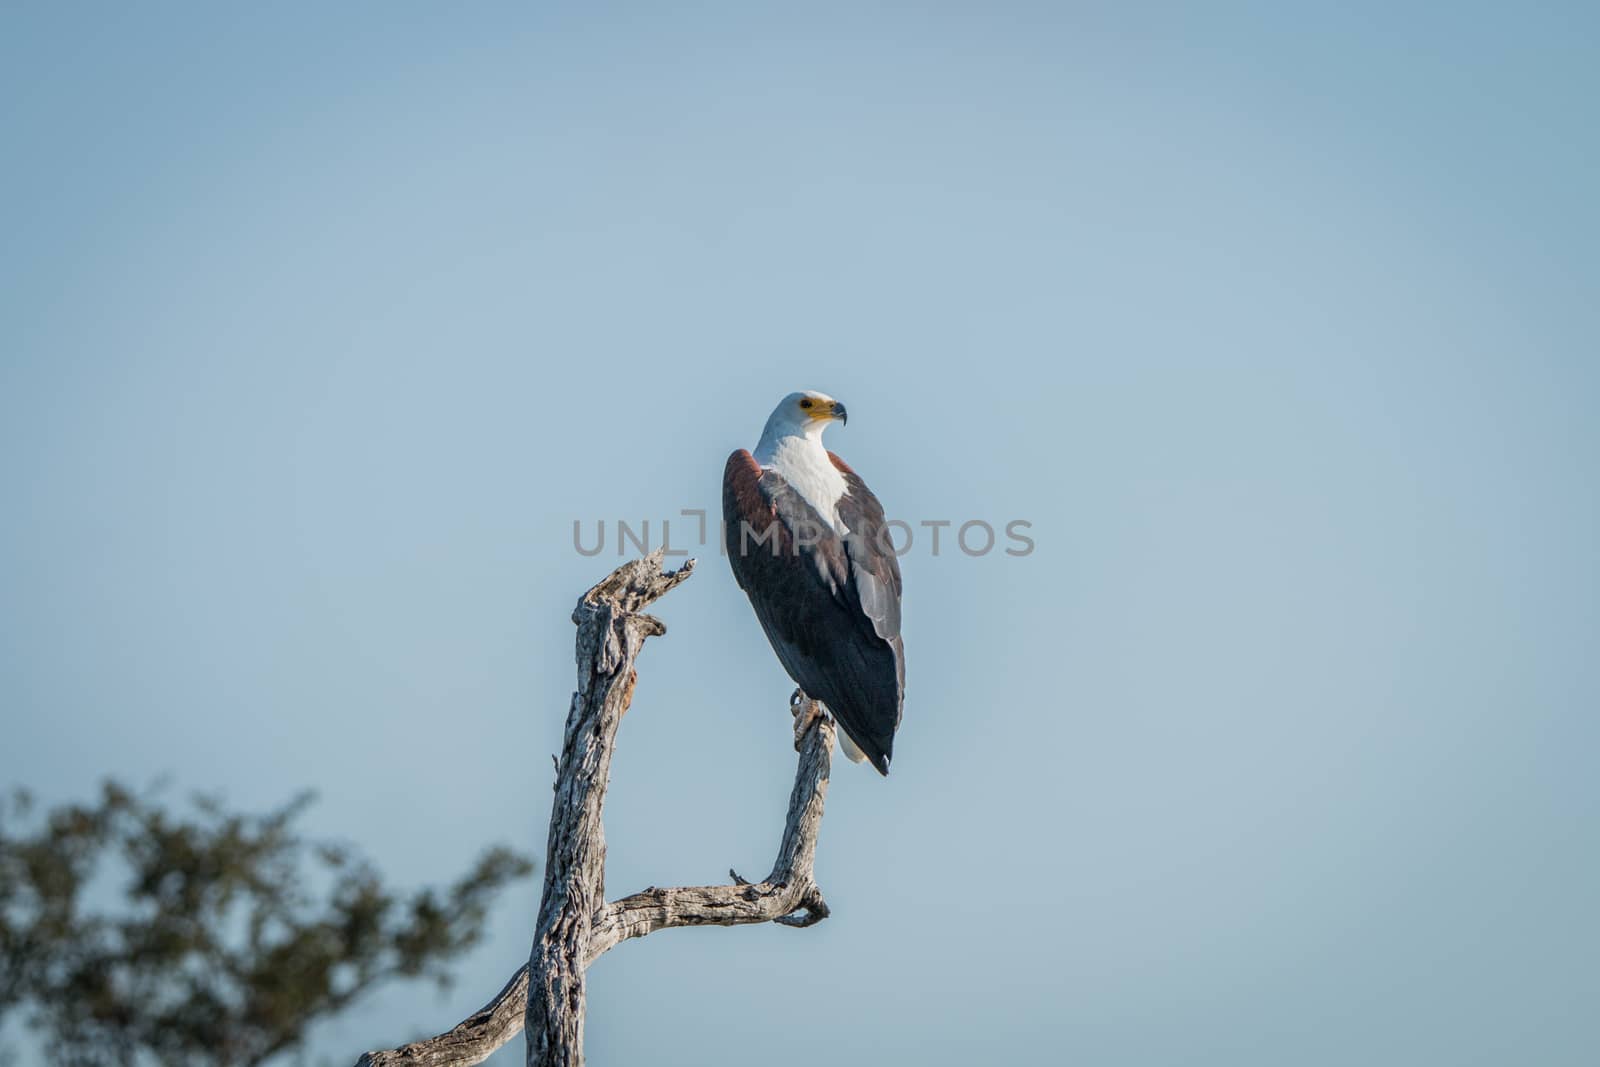 African fish eagle on a branch in the Kruger National Park, South Africa.